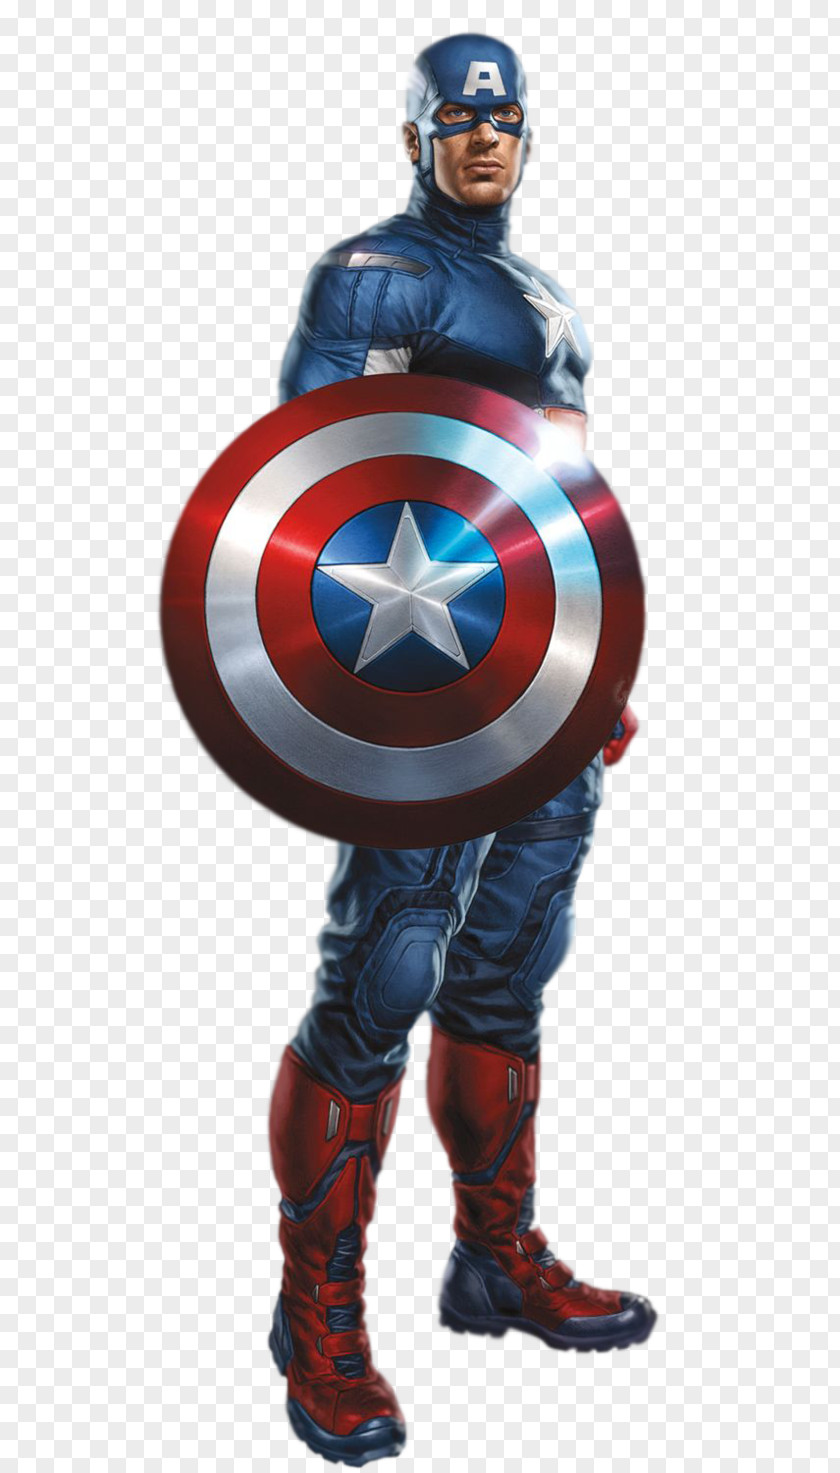 America Captain The Avengers Wall Decal Sticker Superhero PNG